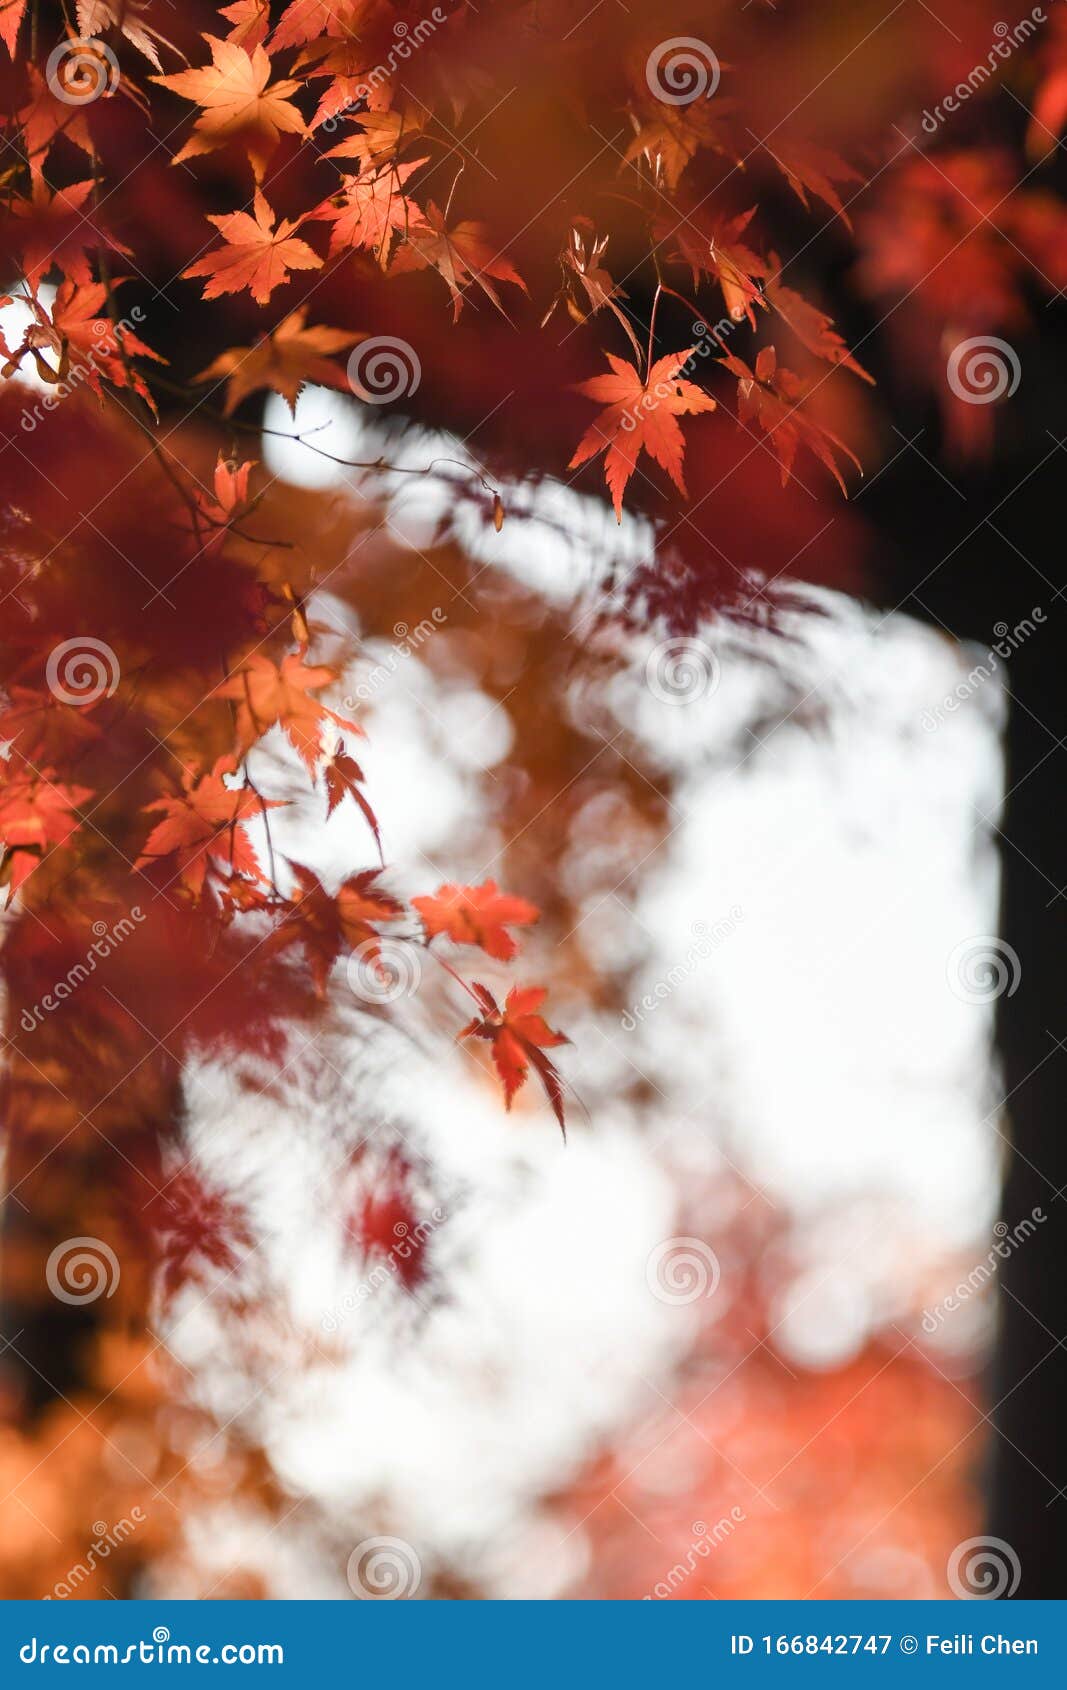 maple leaves and chinese ancient architectural